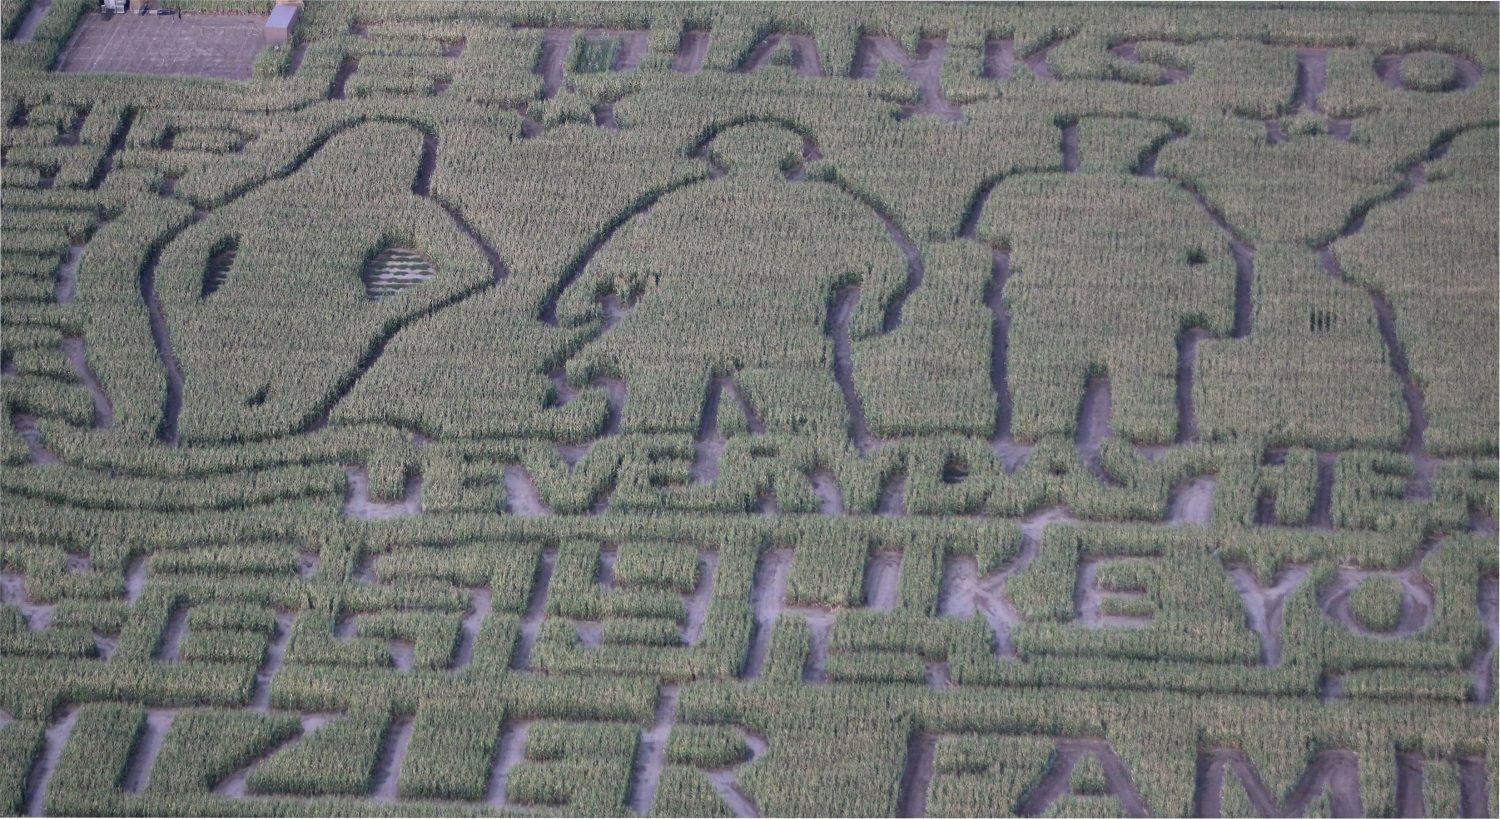 The new design that Fritzlers has for their seasonal corn maze.